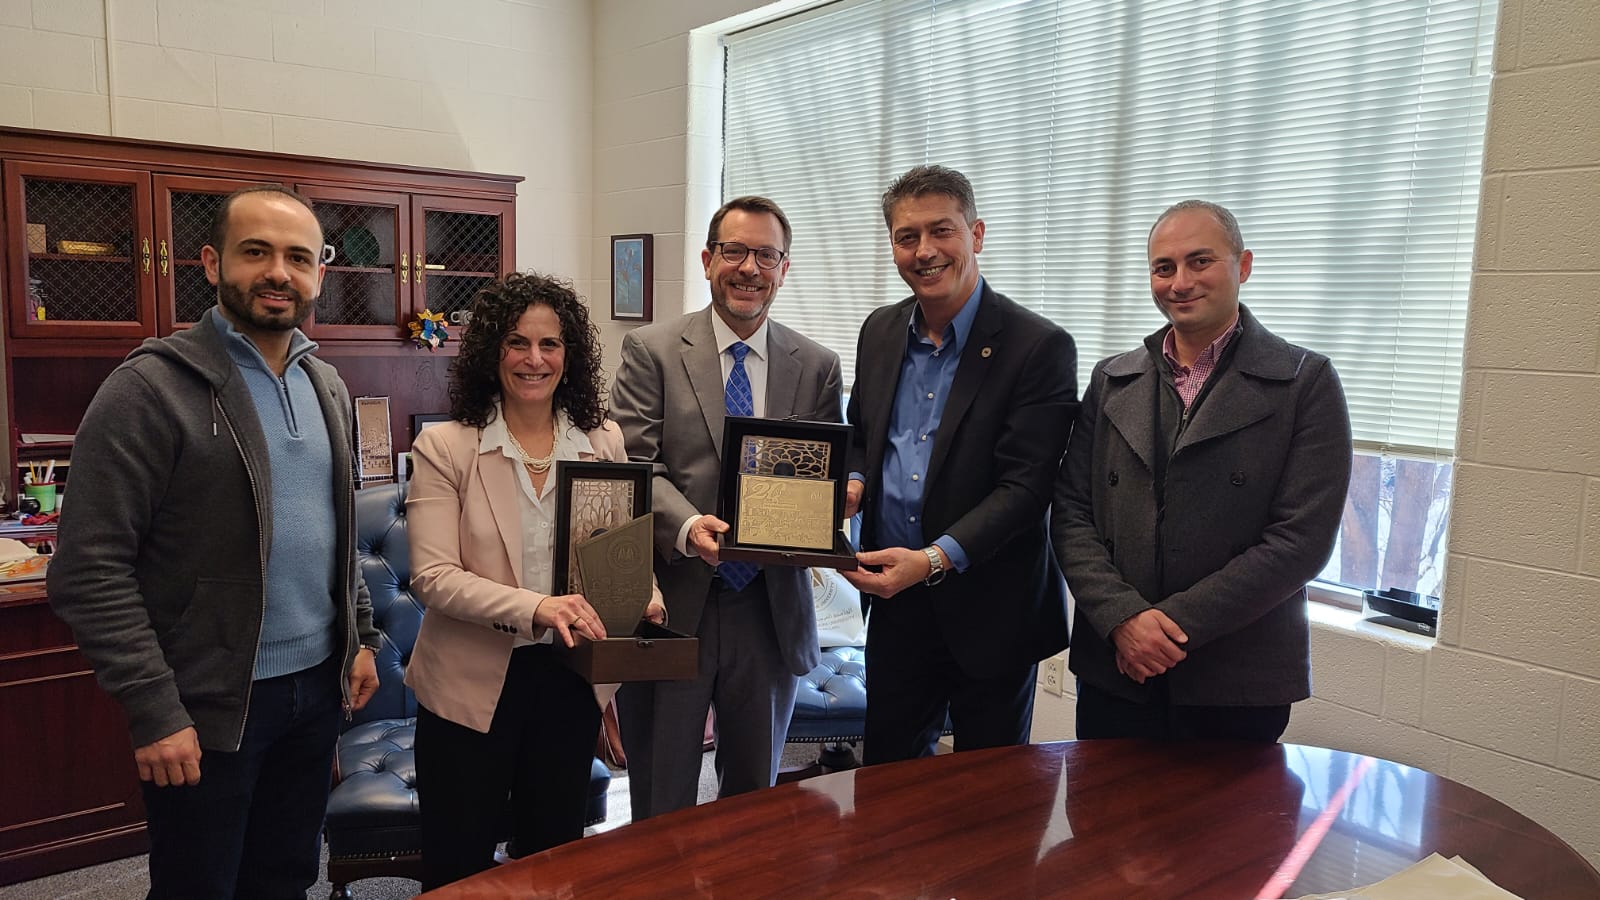 AAUP and Shenandoah Universities Sign MoU to Enhance International Partnership and Collaboration